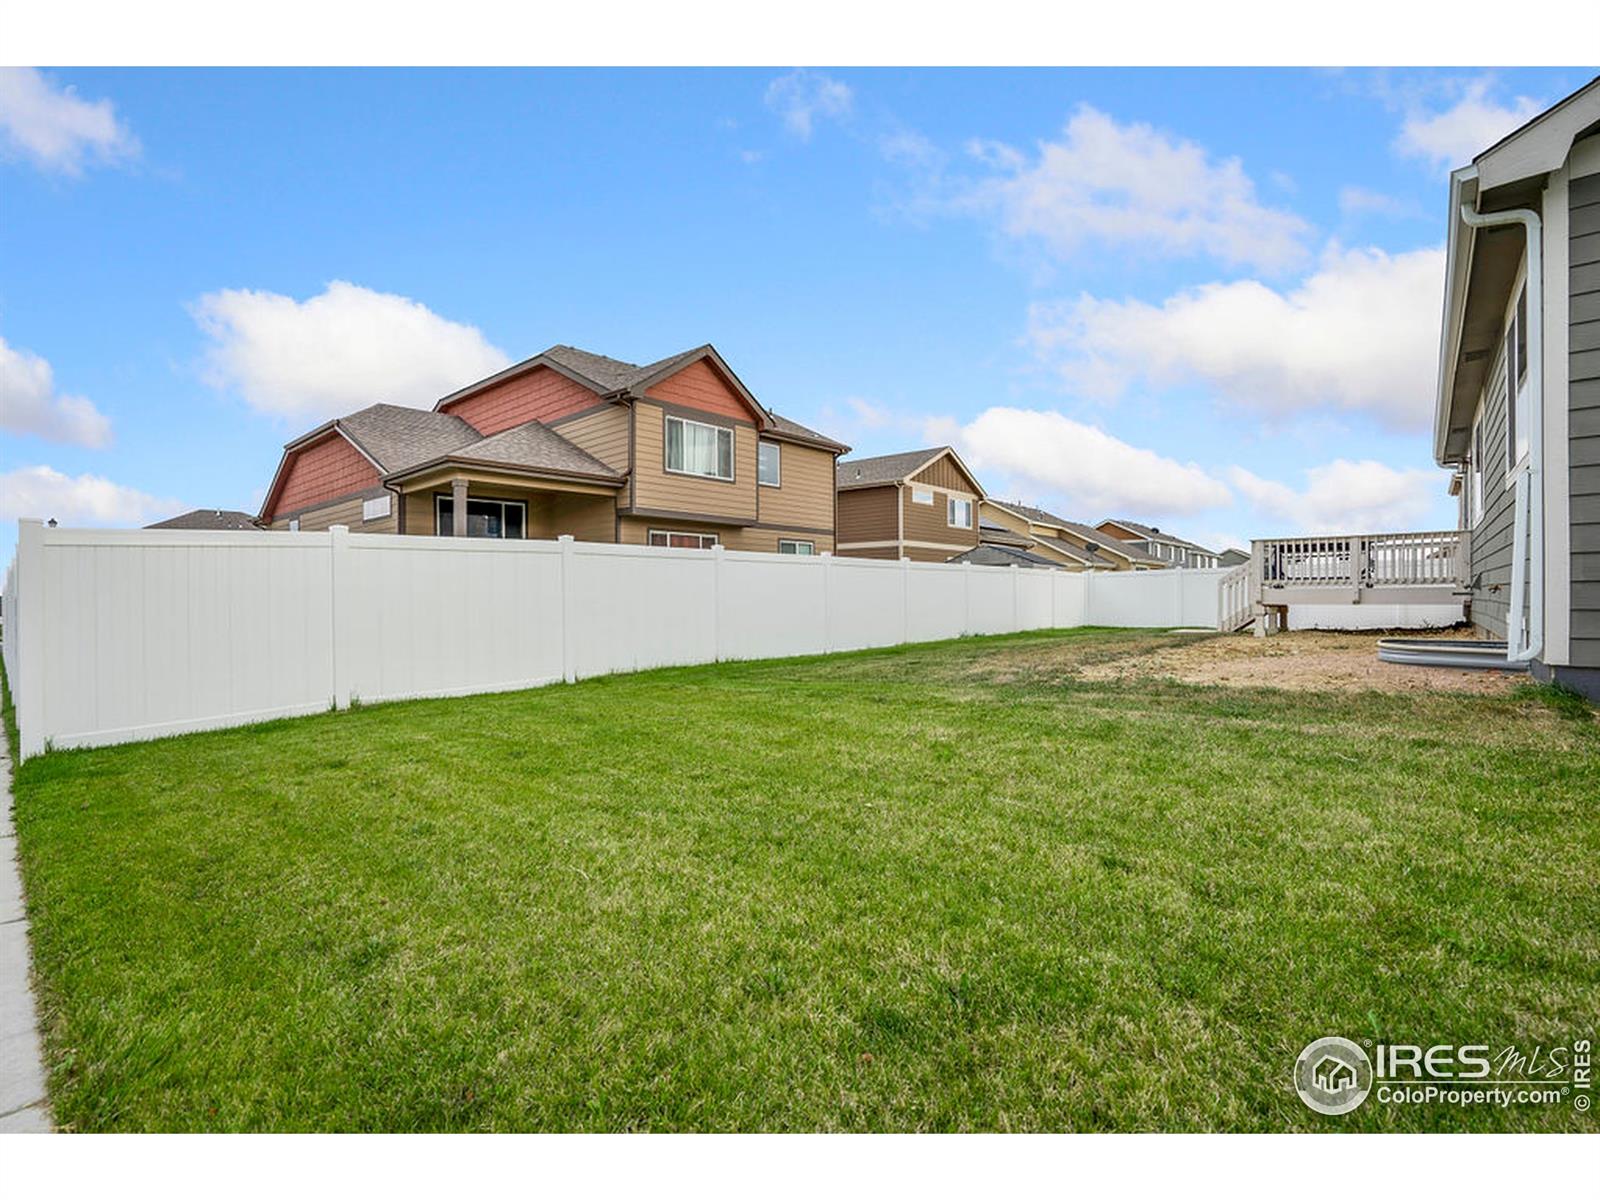 1308 88th, Greeley, CO